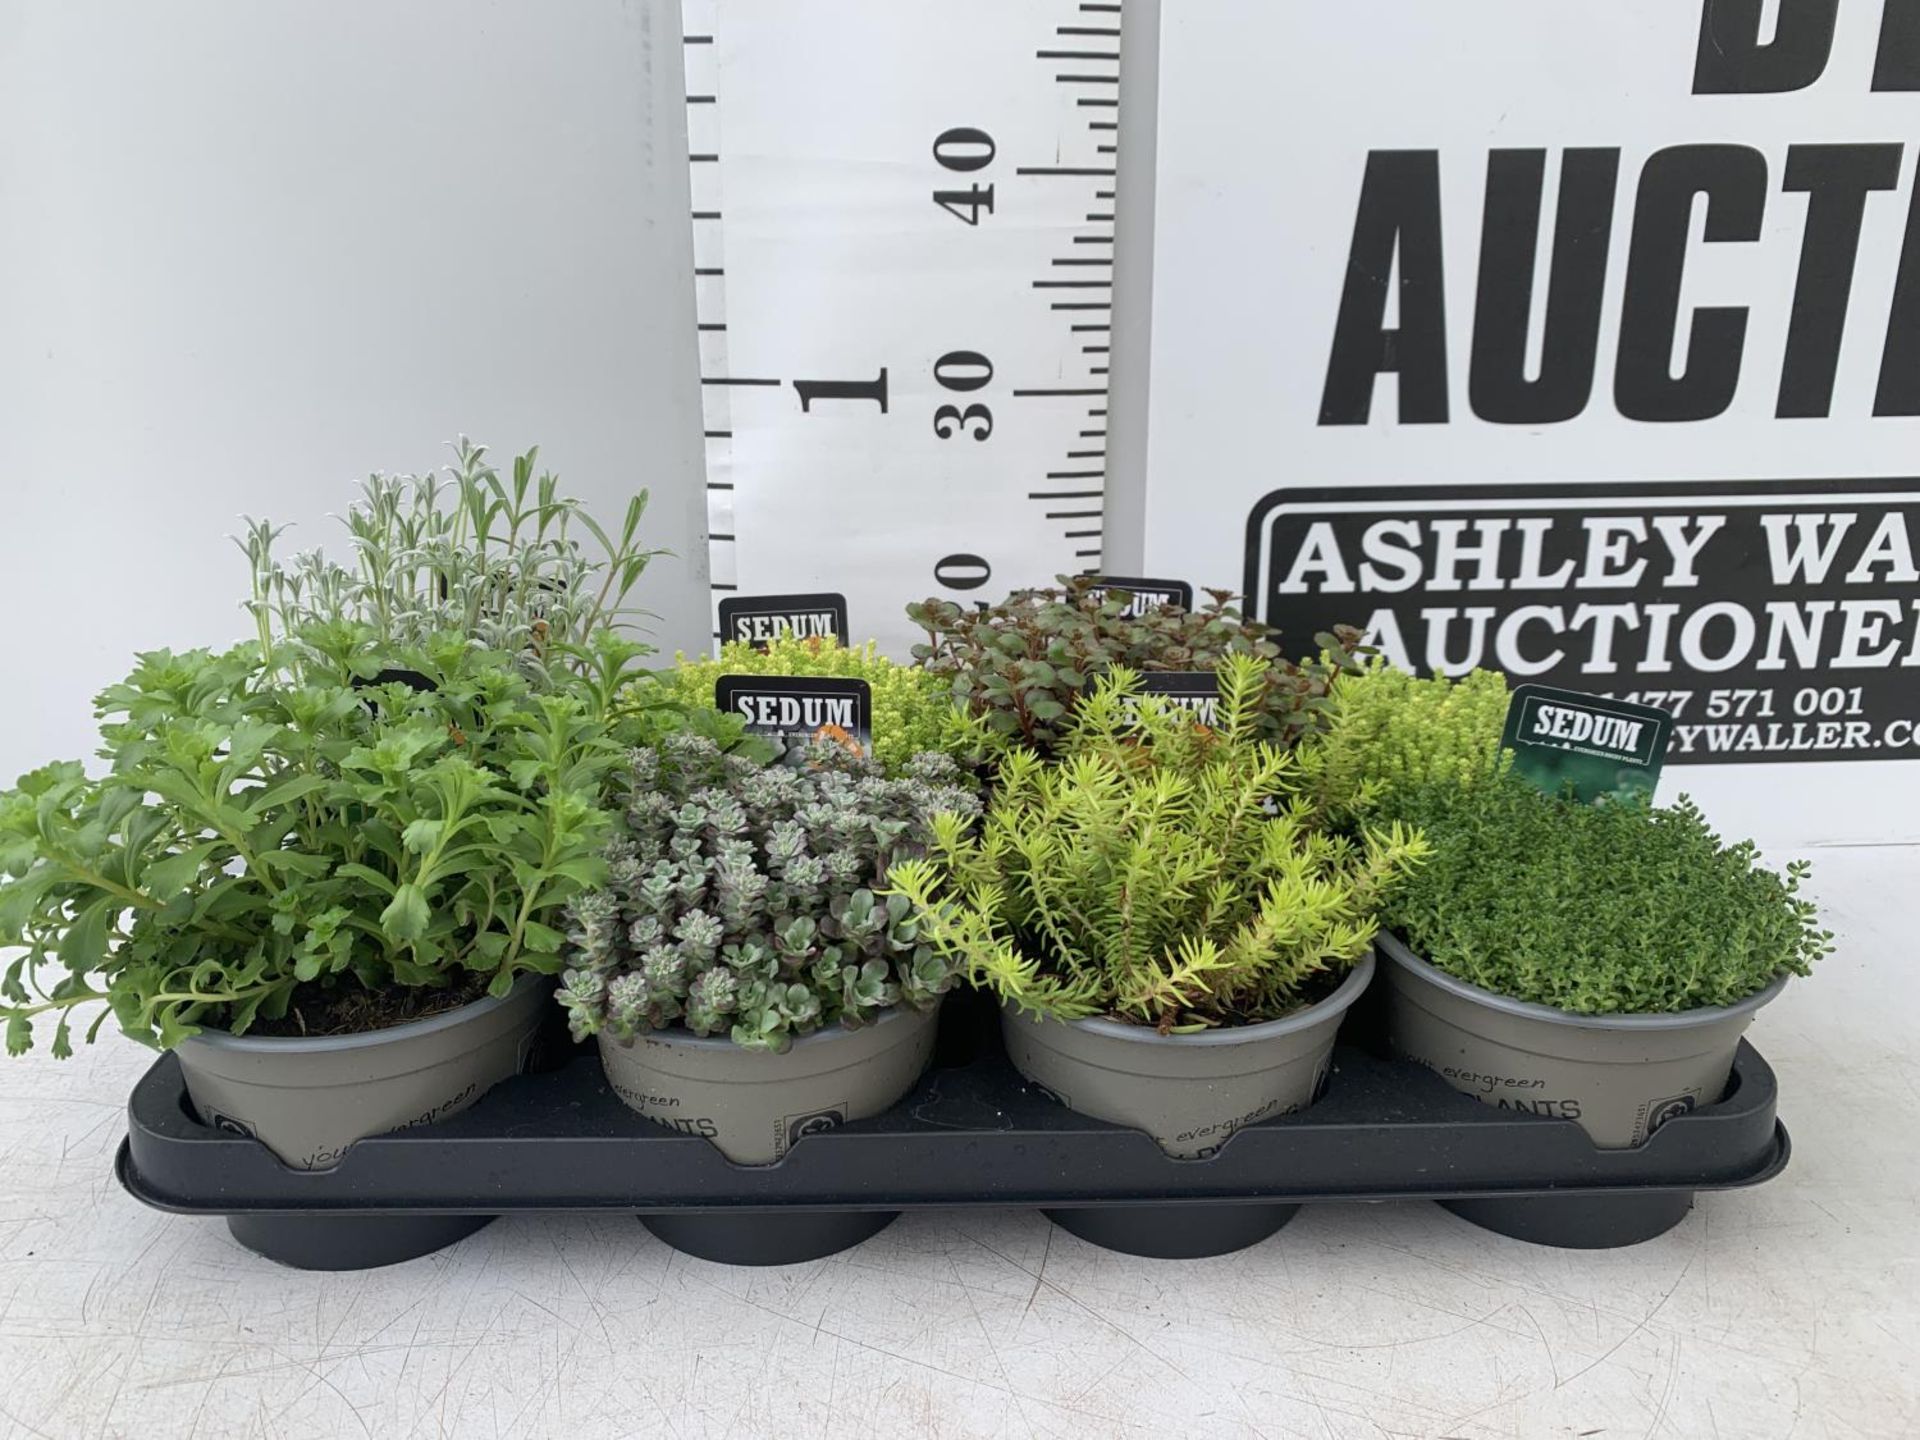 EIGHT MIXED EVERGREEN SEDUMS ON A TRAY IN P14 POTS PLUS VAT TO BE SOLD FOR THE EIGHT - Image 4 of 8